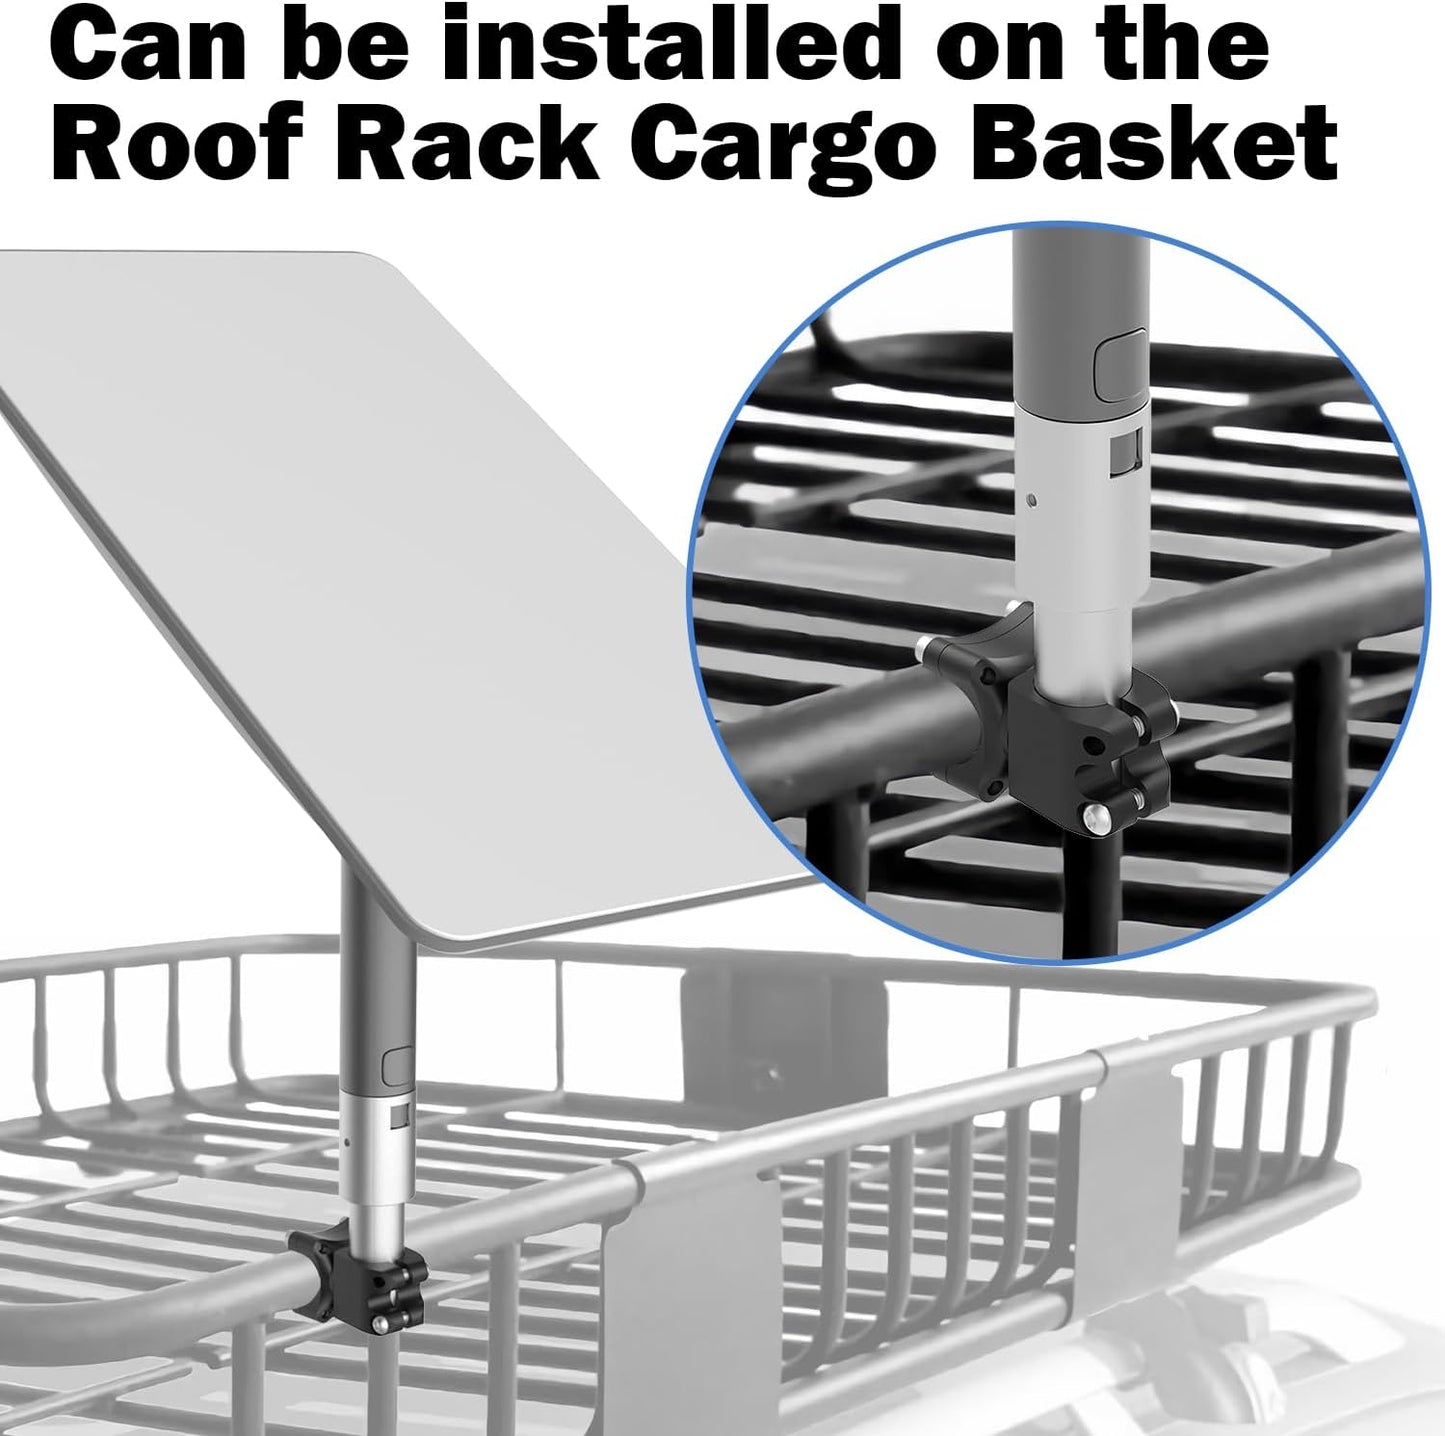 Mount for RV Ladder, Starlink Mount for Roof Rack,Load-Bearing 200lbs, Installation Range 0.8-1.17” for Pole/Roof/SUV/Outdoor